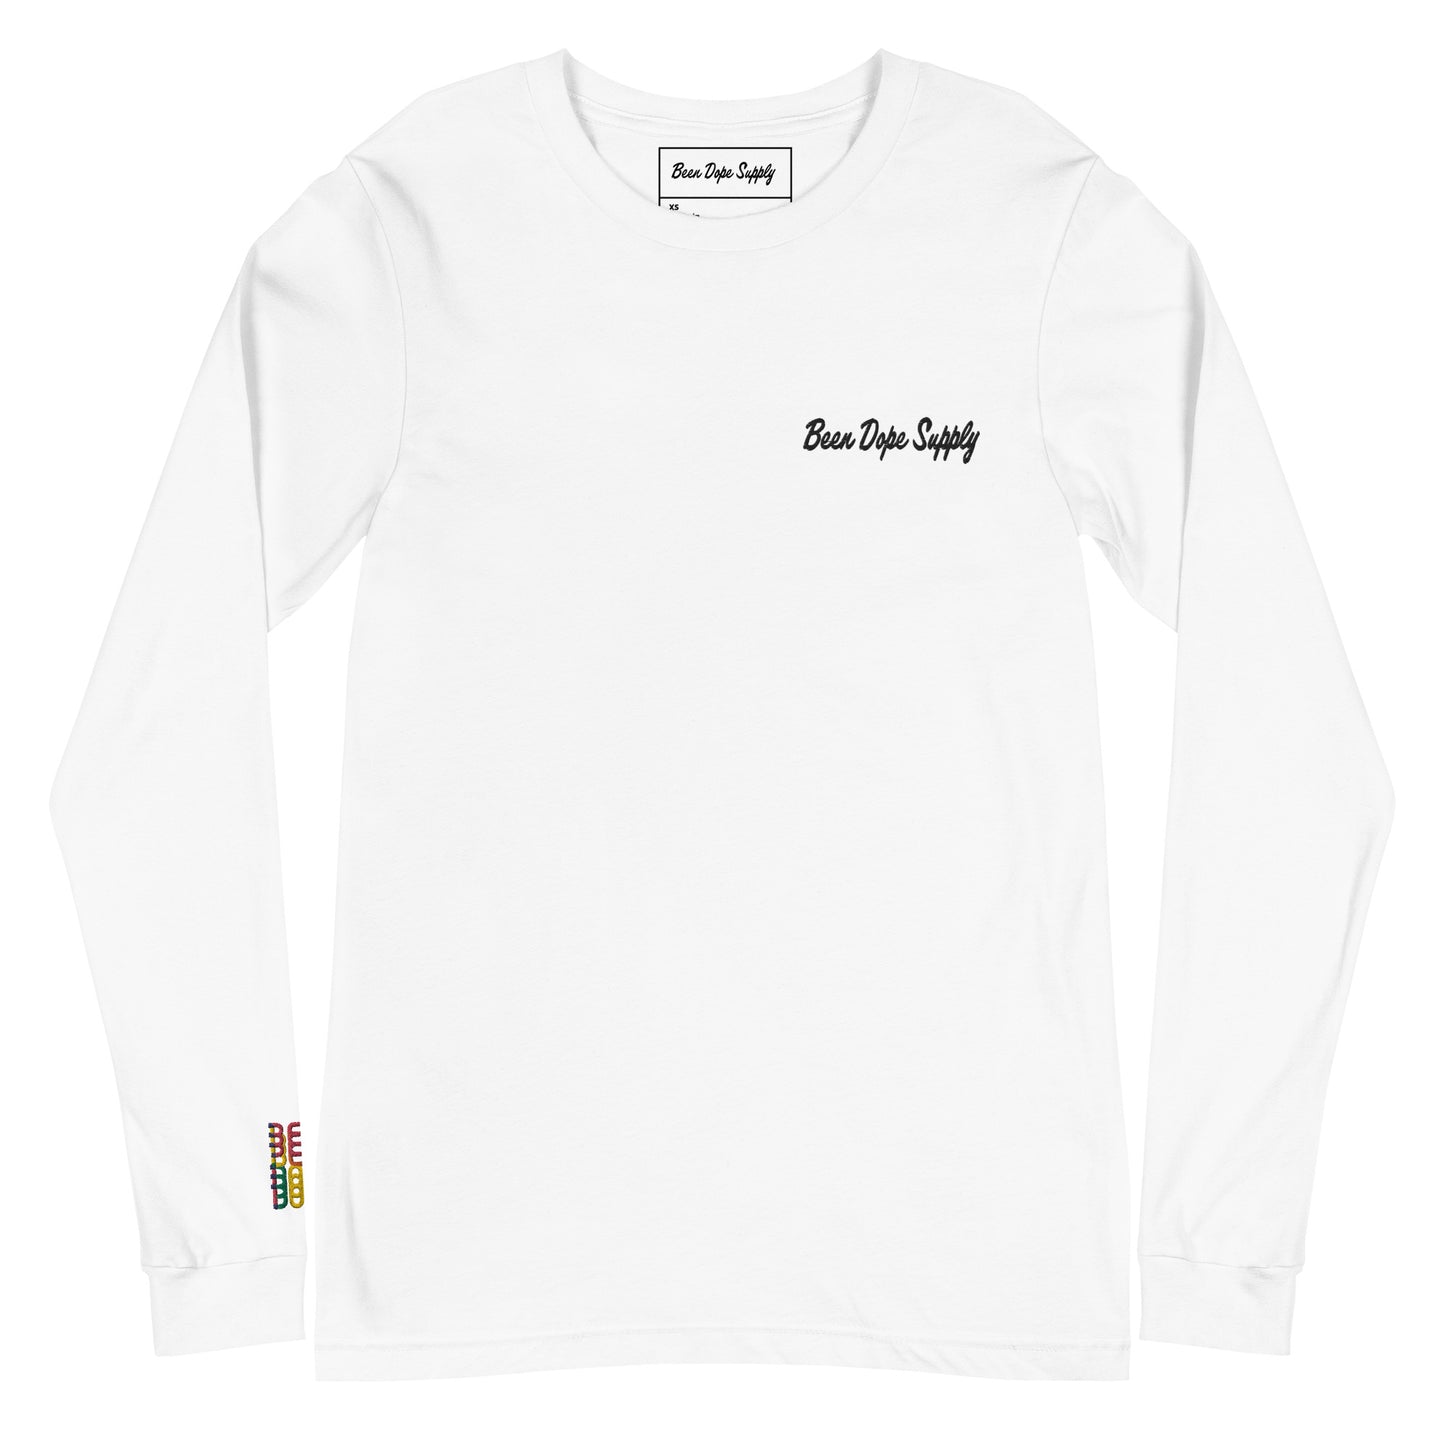 Been Dope Supply | White Long Sleeve Tee | Embroidered